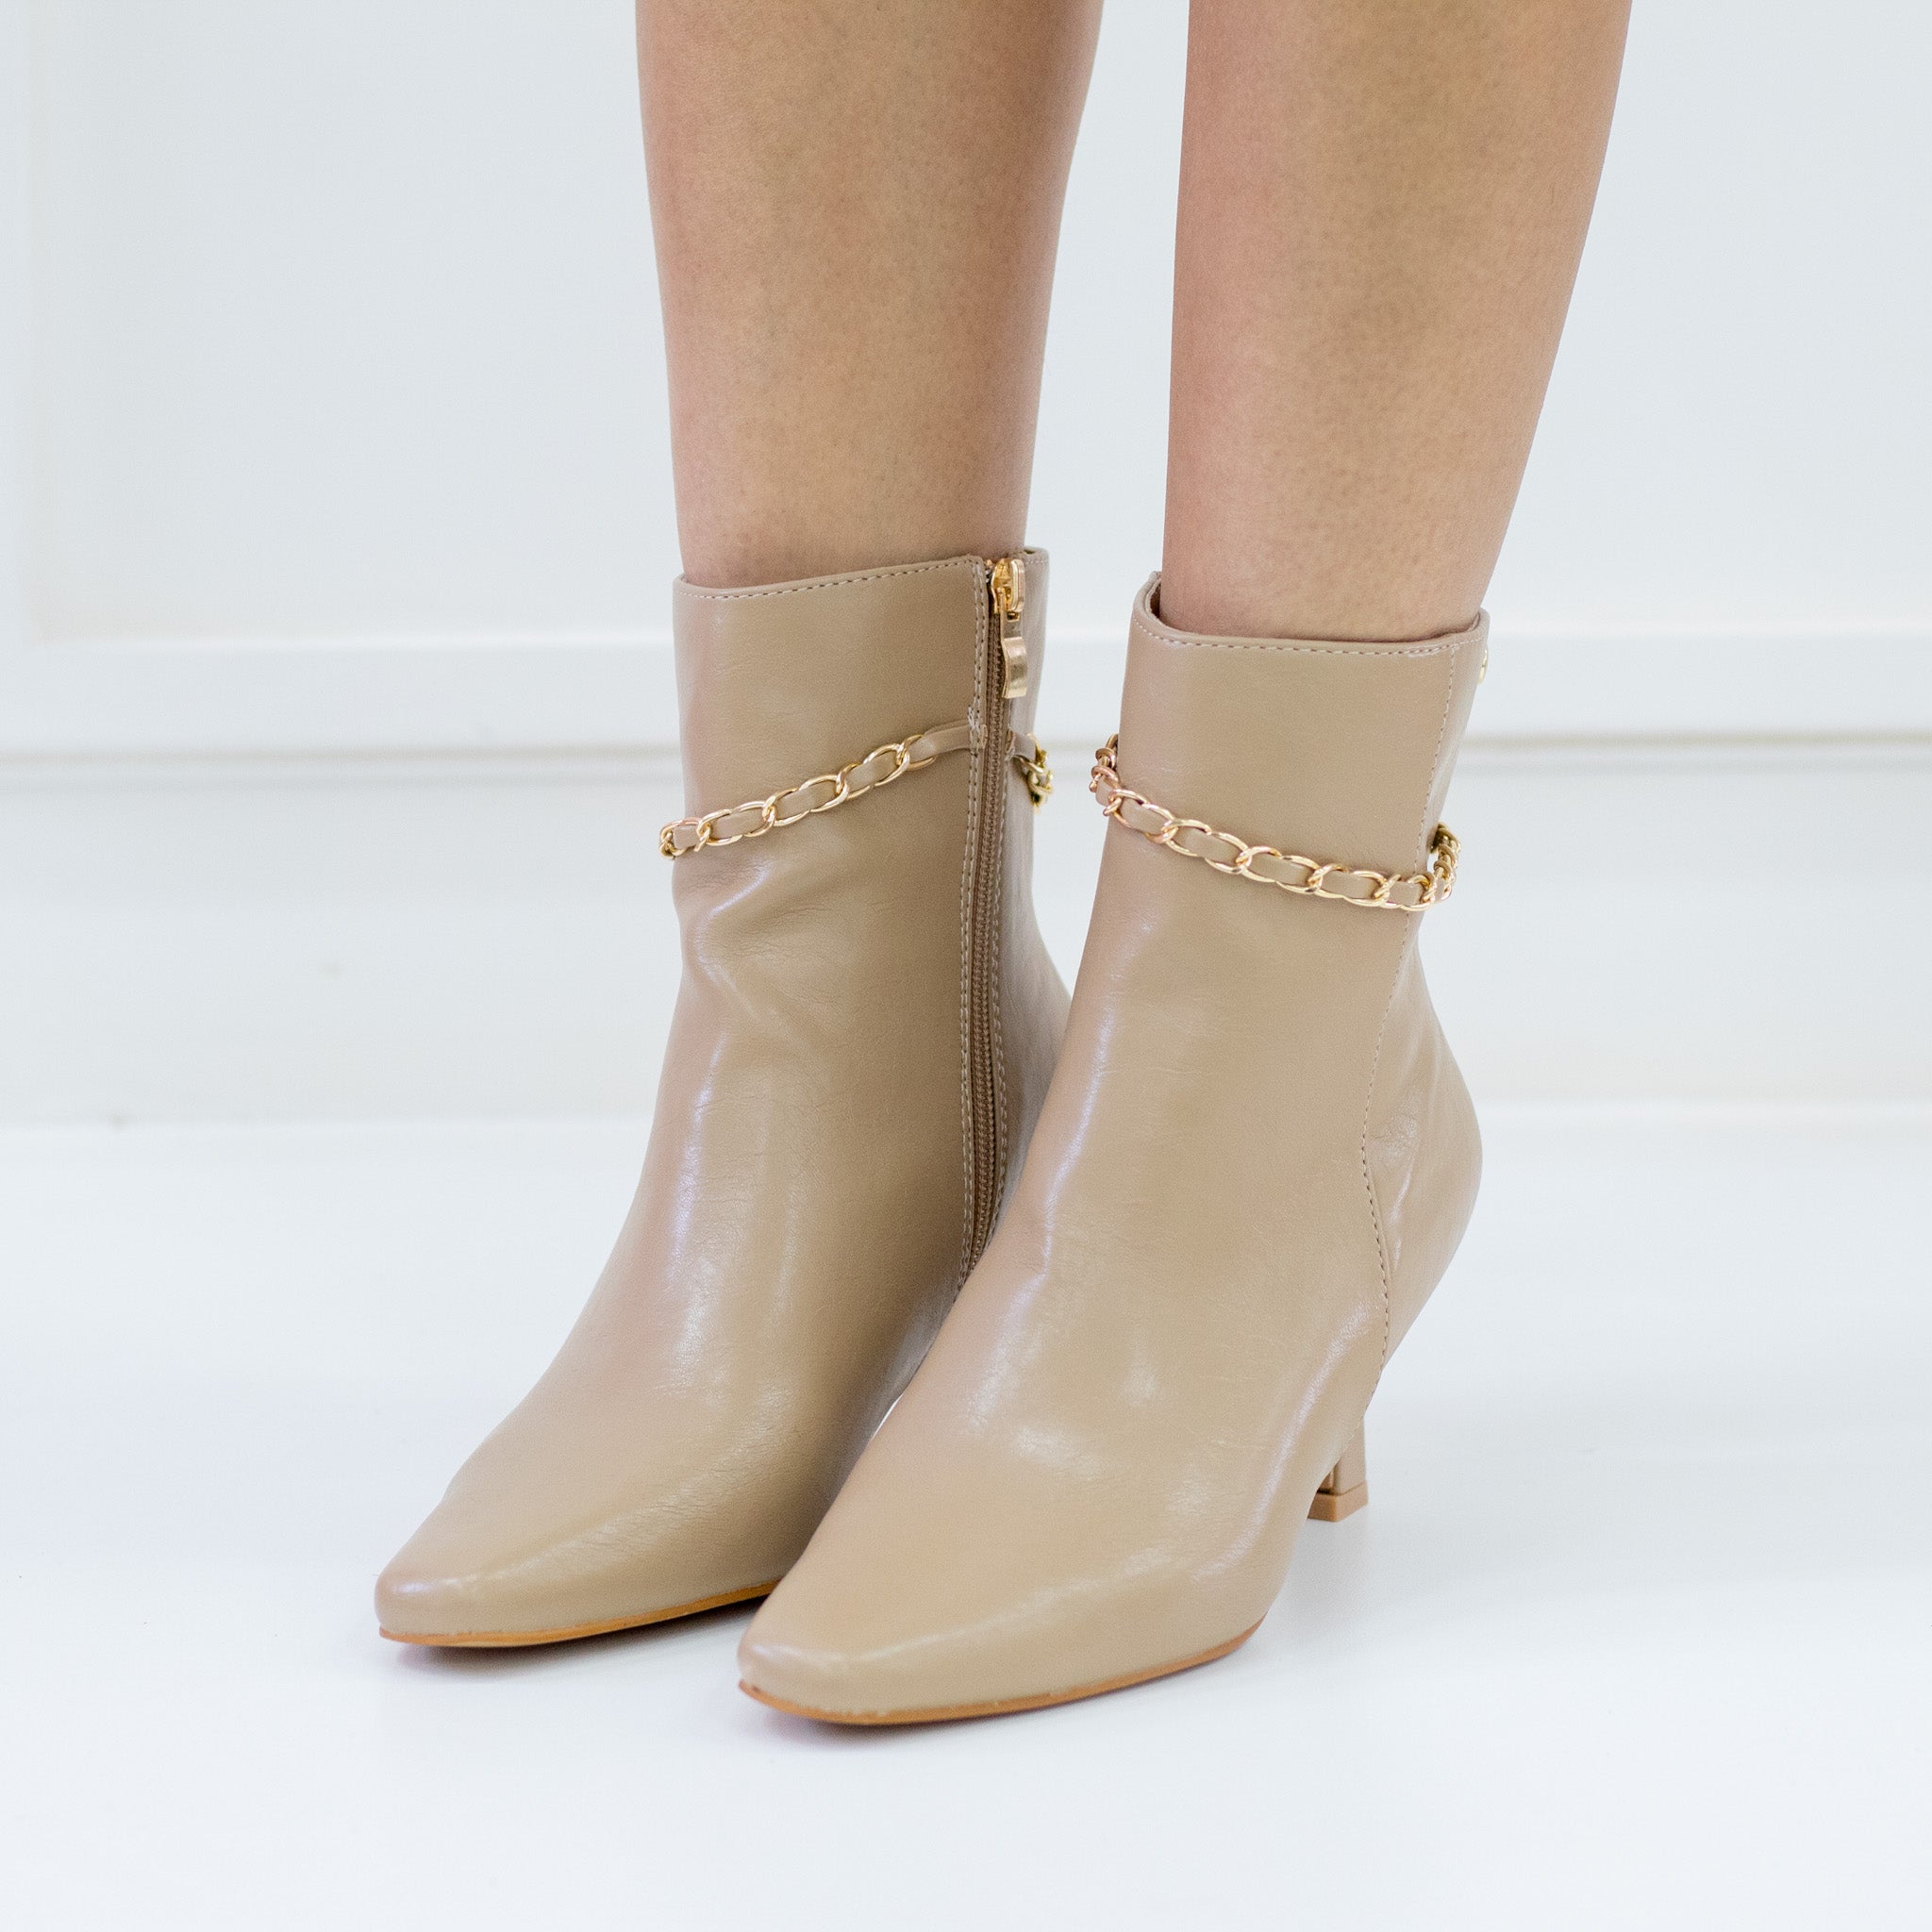 Preview 7cm heel faux leather pu ankle boot beige